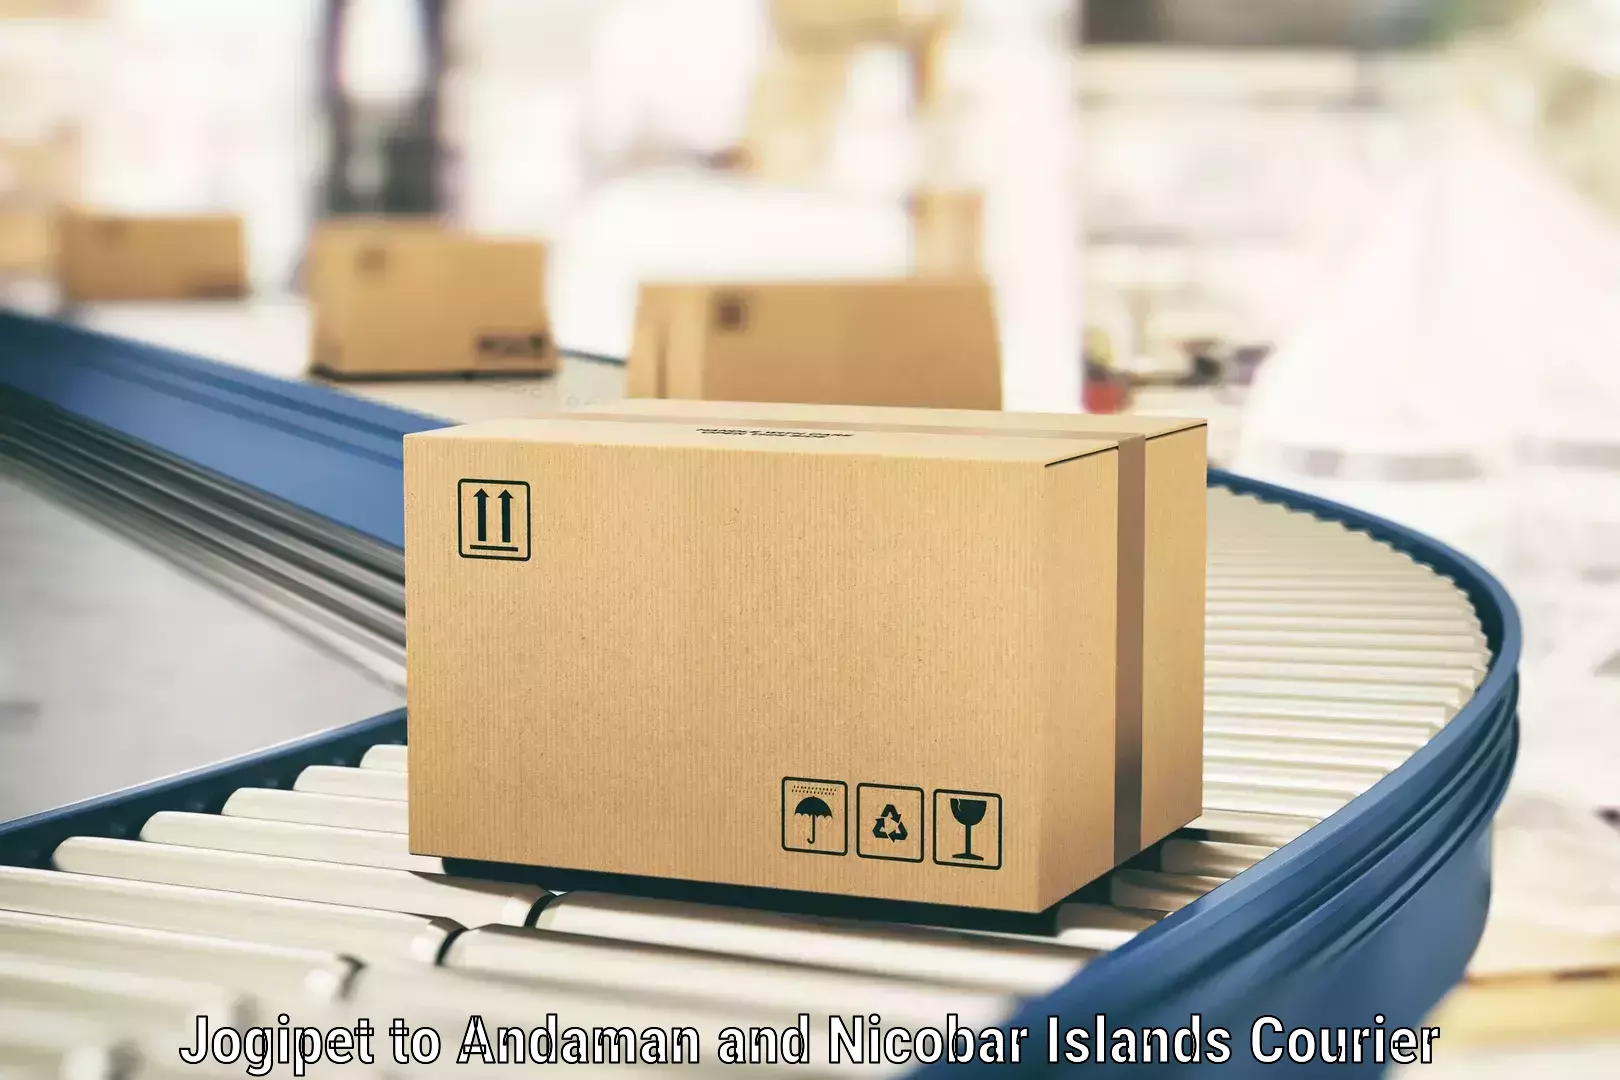 Easy access courier services Jogipet to Andaman and Nicobar Islands